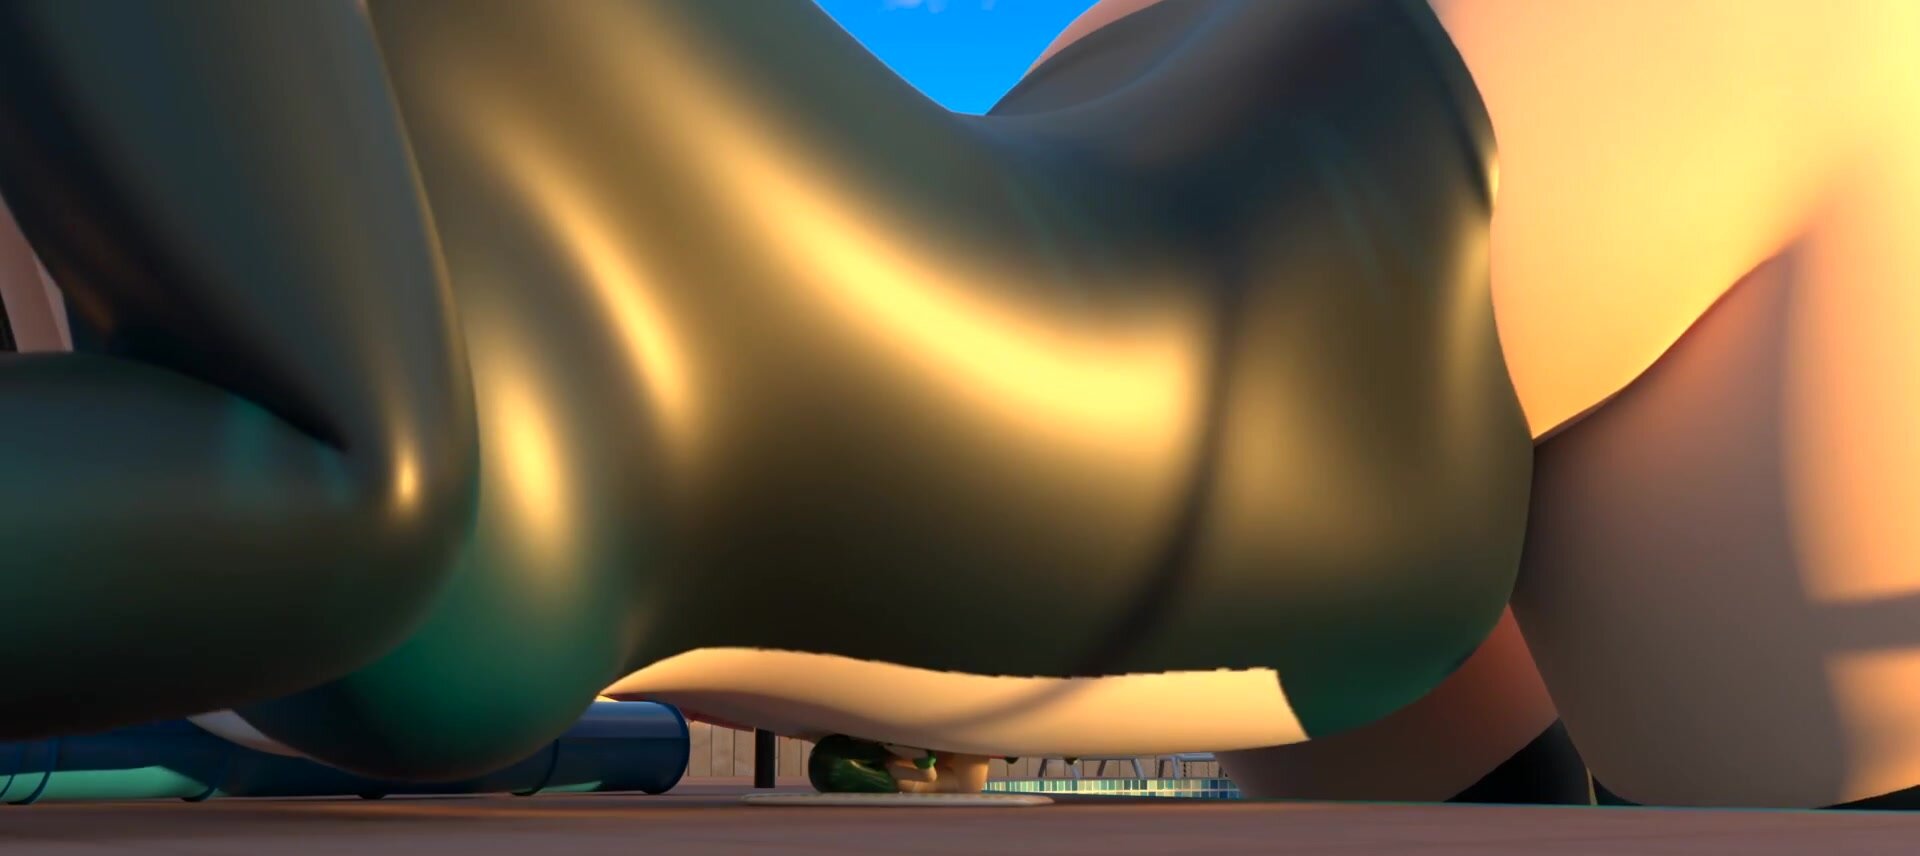 Animated inflation porn